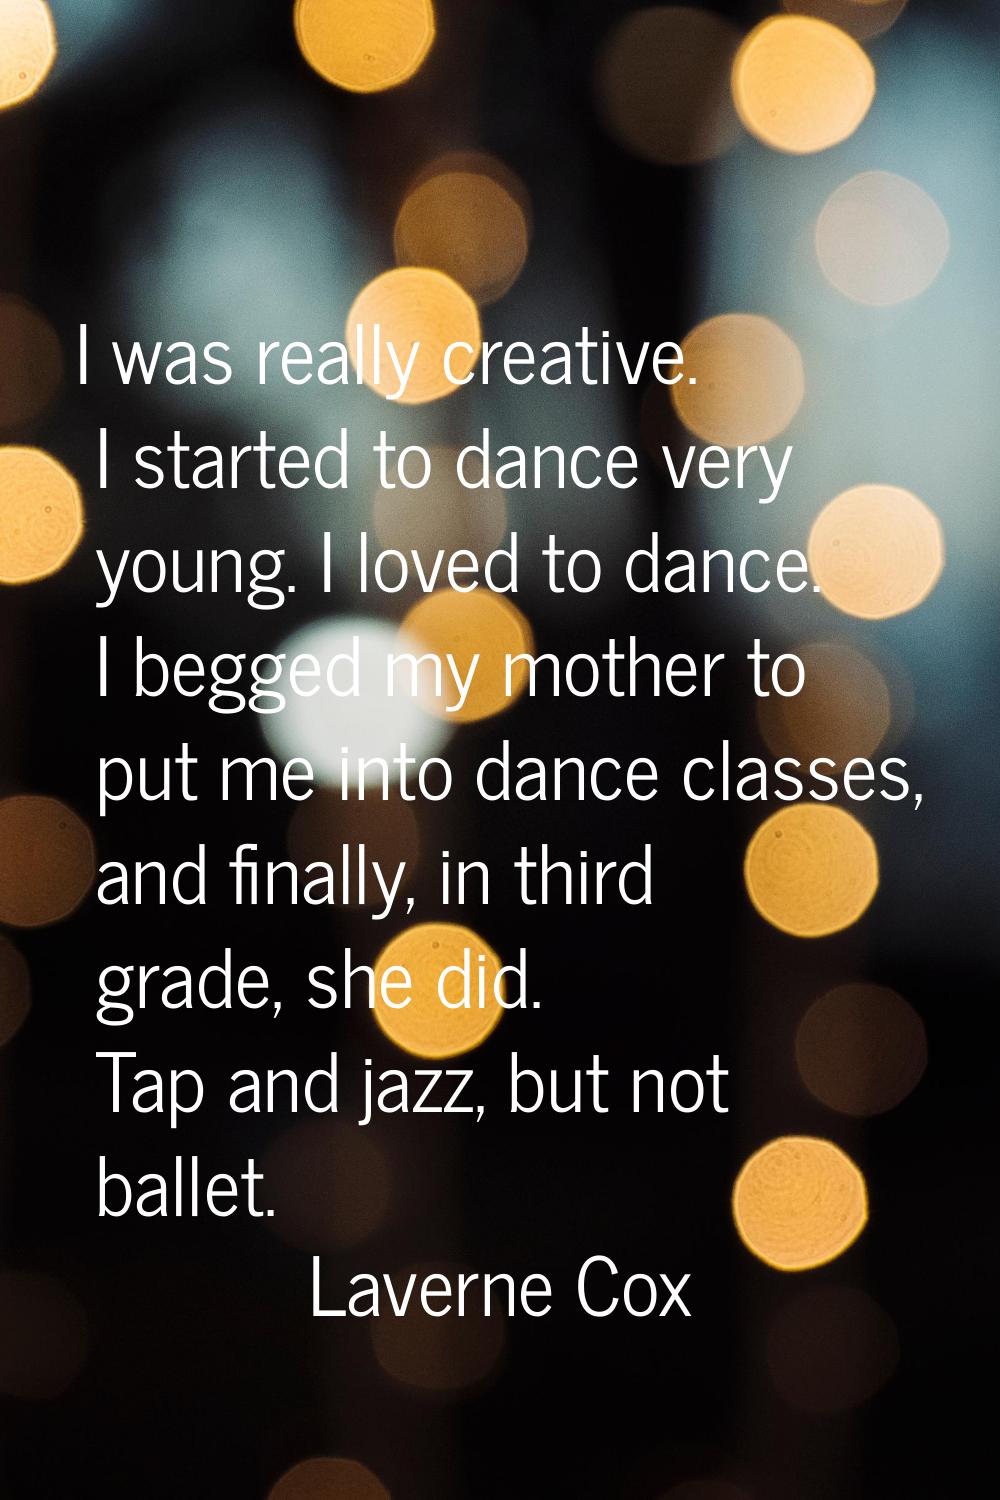 I was really creative. I started to dance very young. I loved to dance. I begged my mother to put m